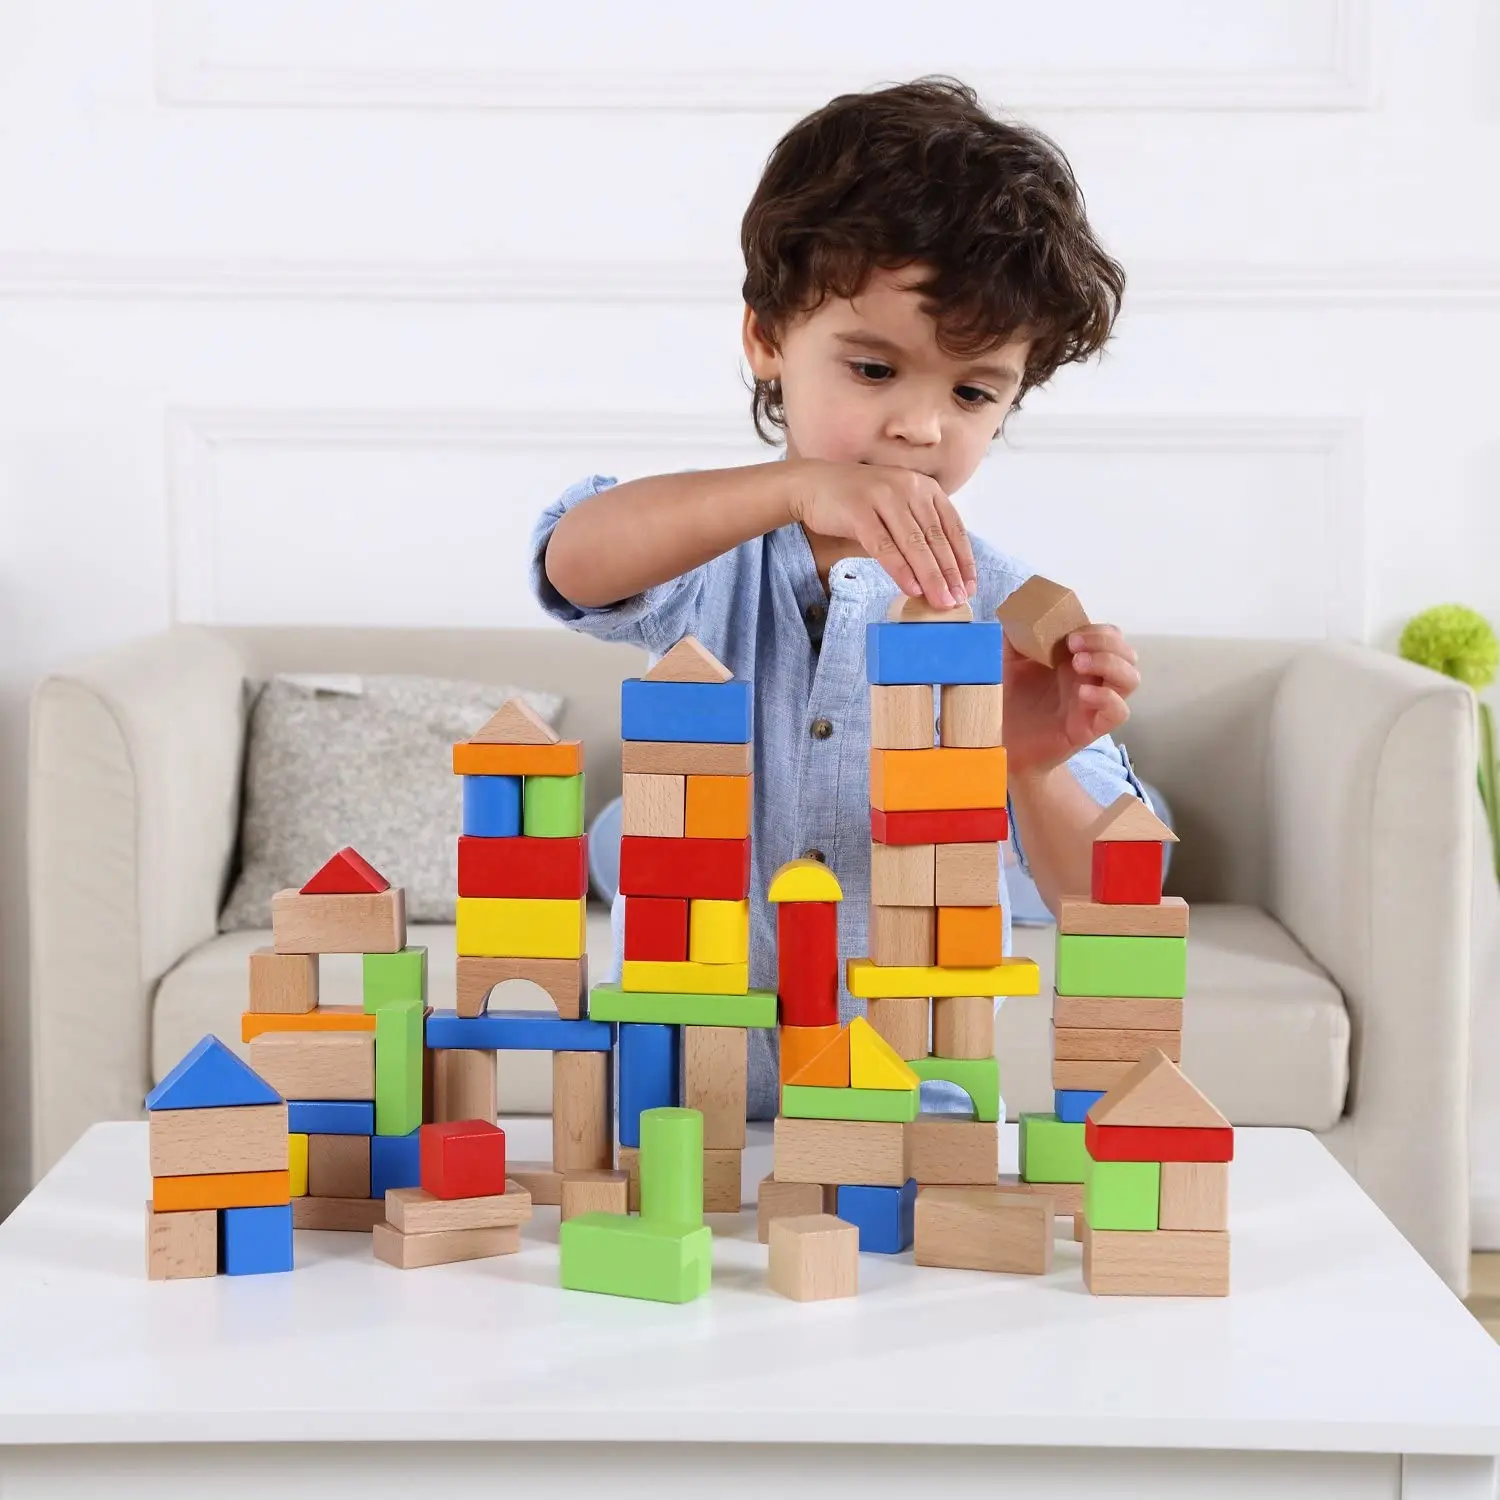 Top Educational Toys To Buy Your Young Child, 44% OFF